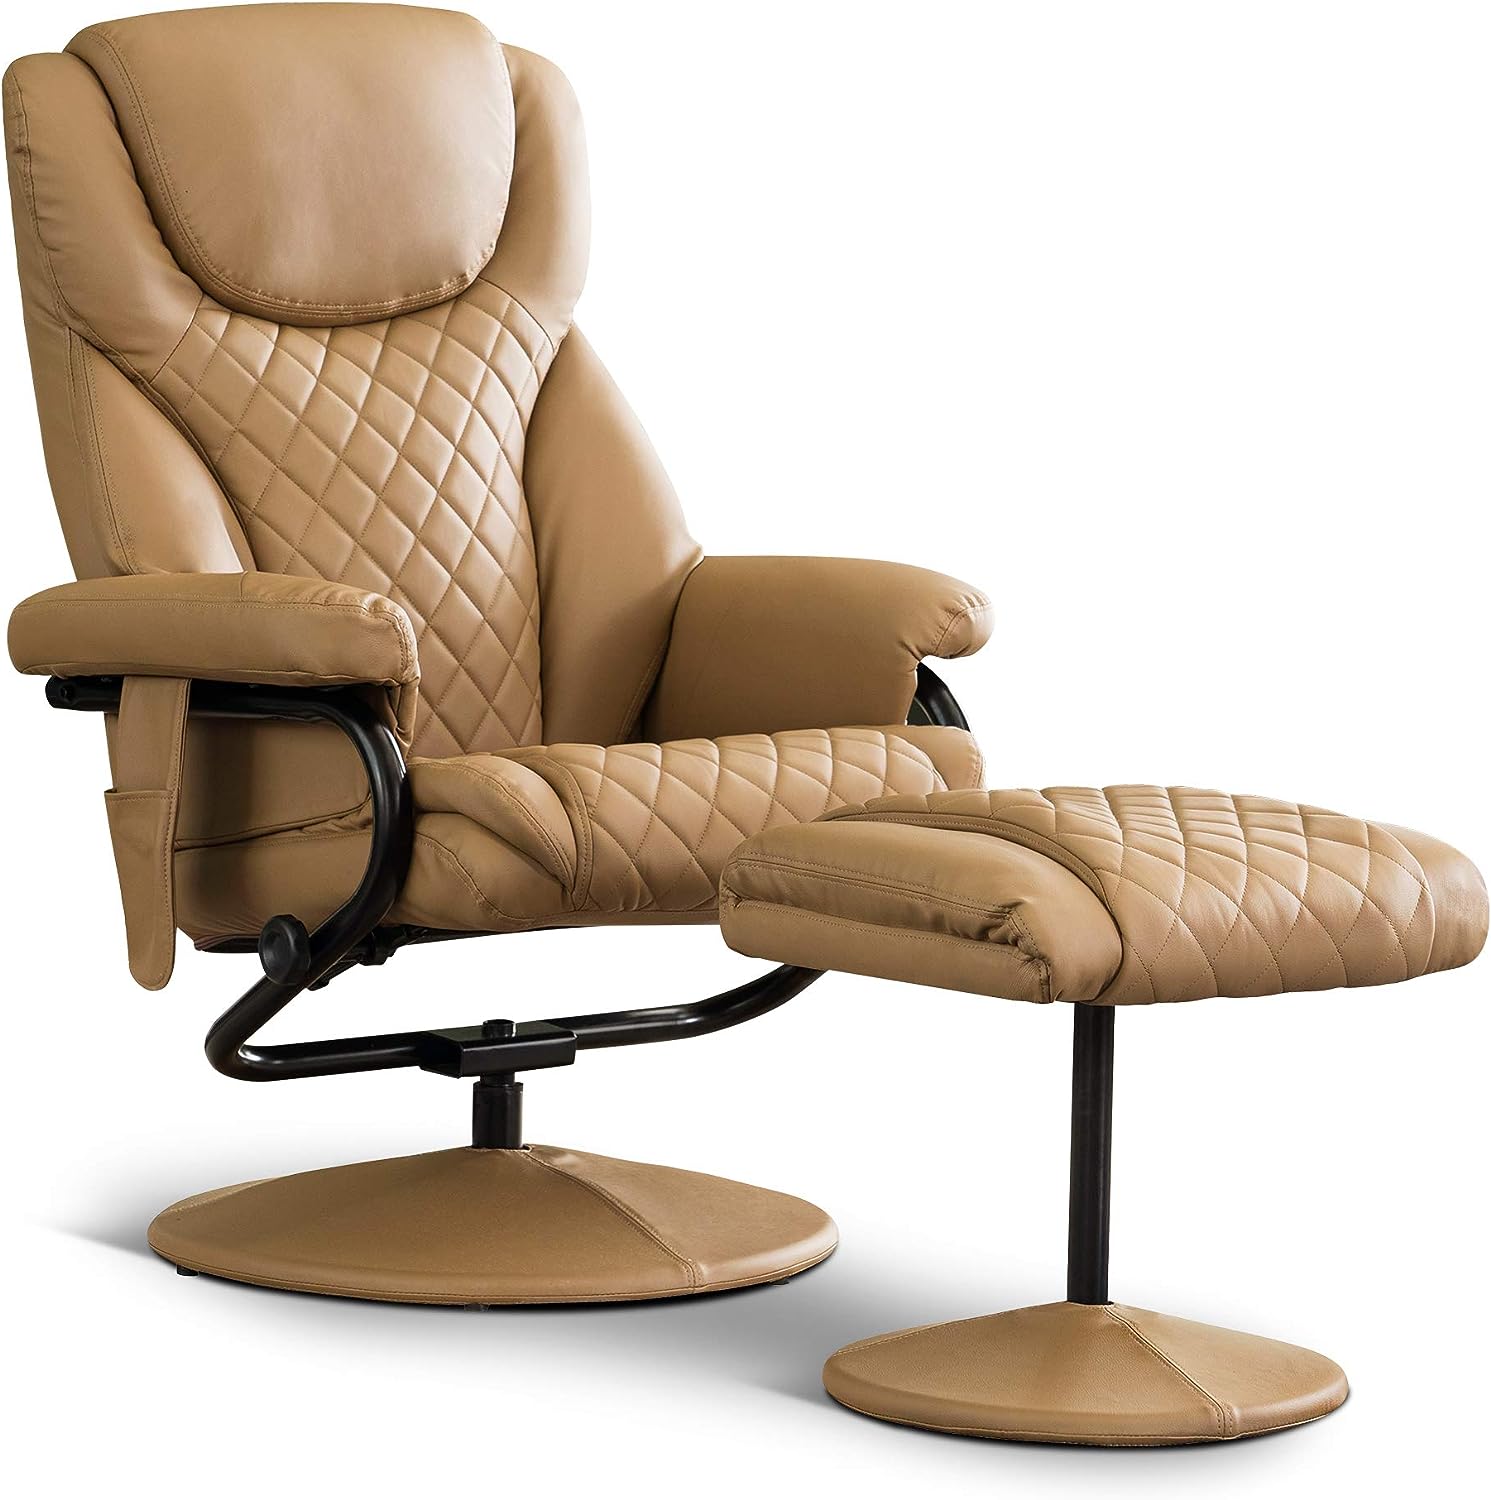 MCombo Recliner with Ottoman, Reclining Chair with [...]